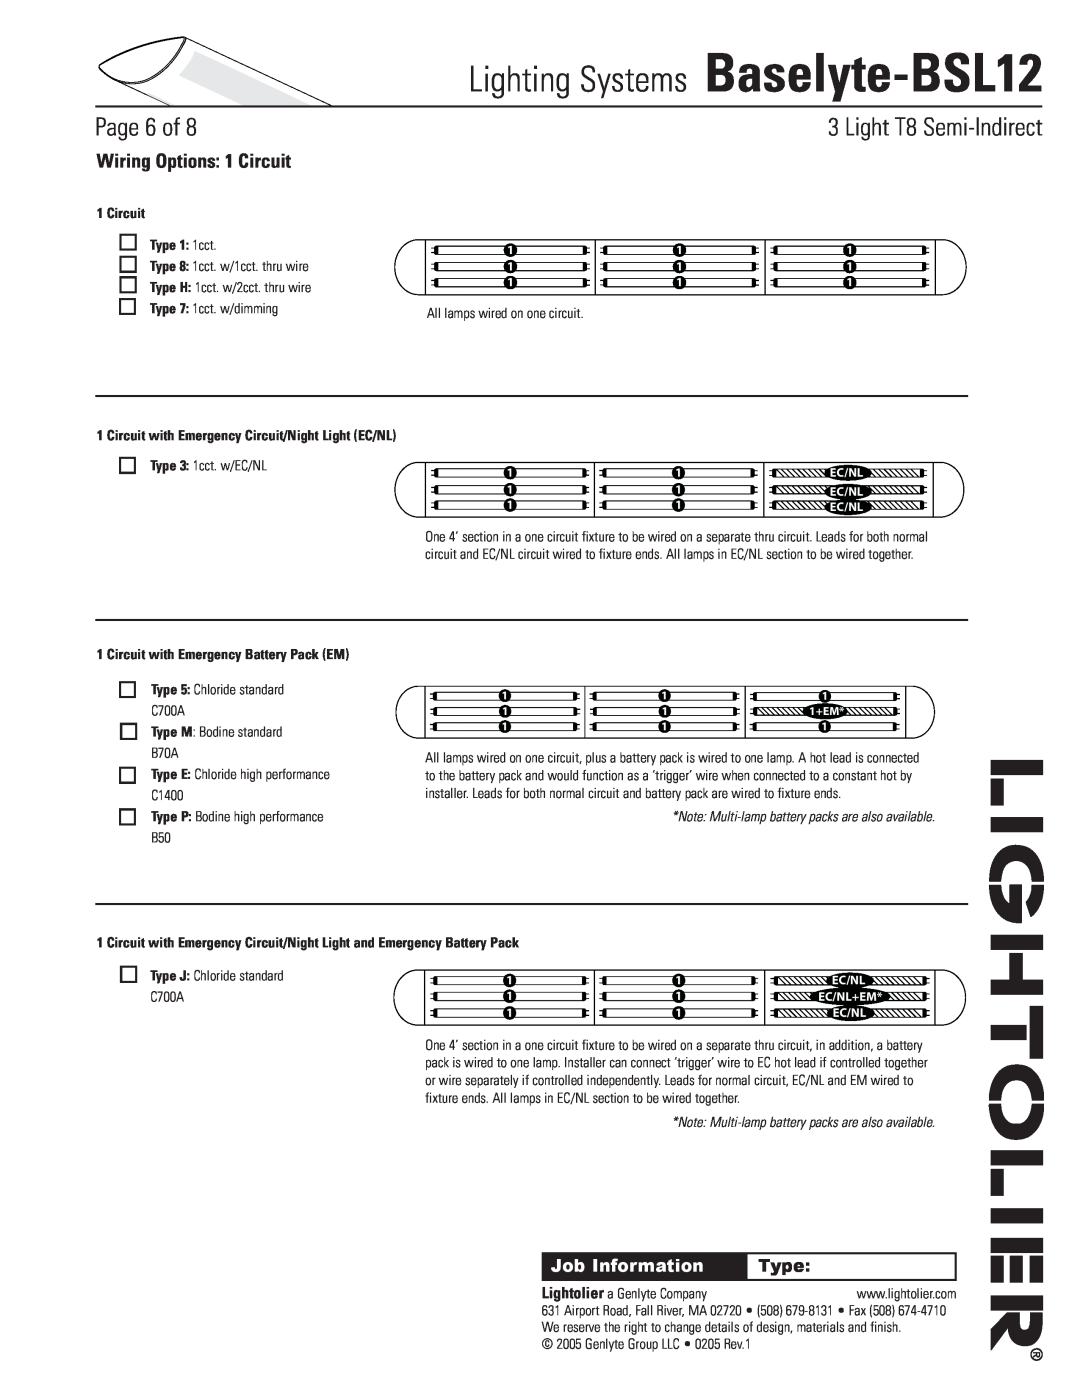 Lightolier Baselyte-BSL12 Wiring Options 1 Circuit, Circuit Type 1 1cct, Circuit with Emergency Battery Pack EM, Page of 